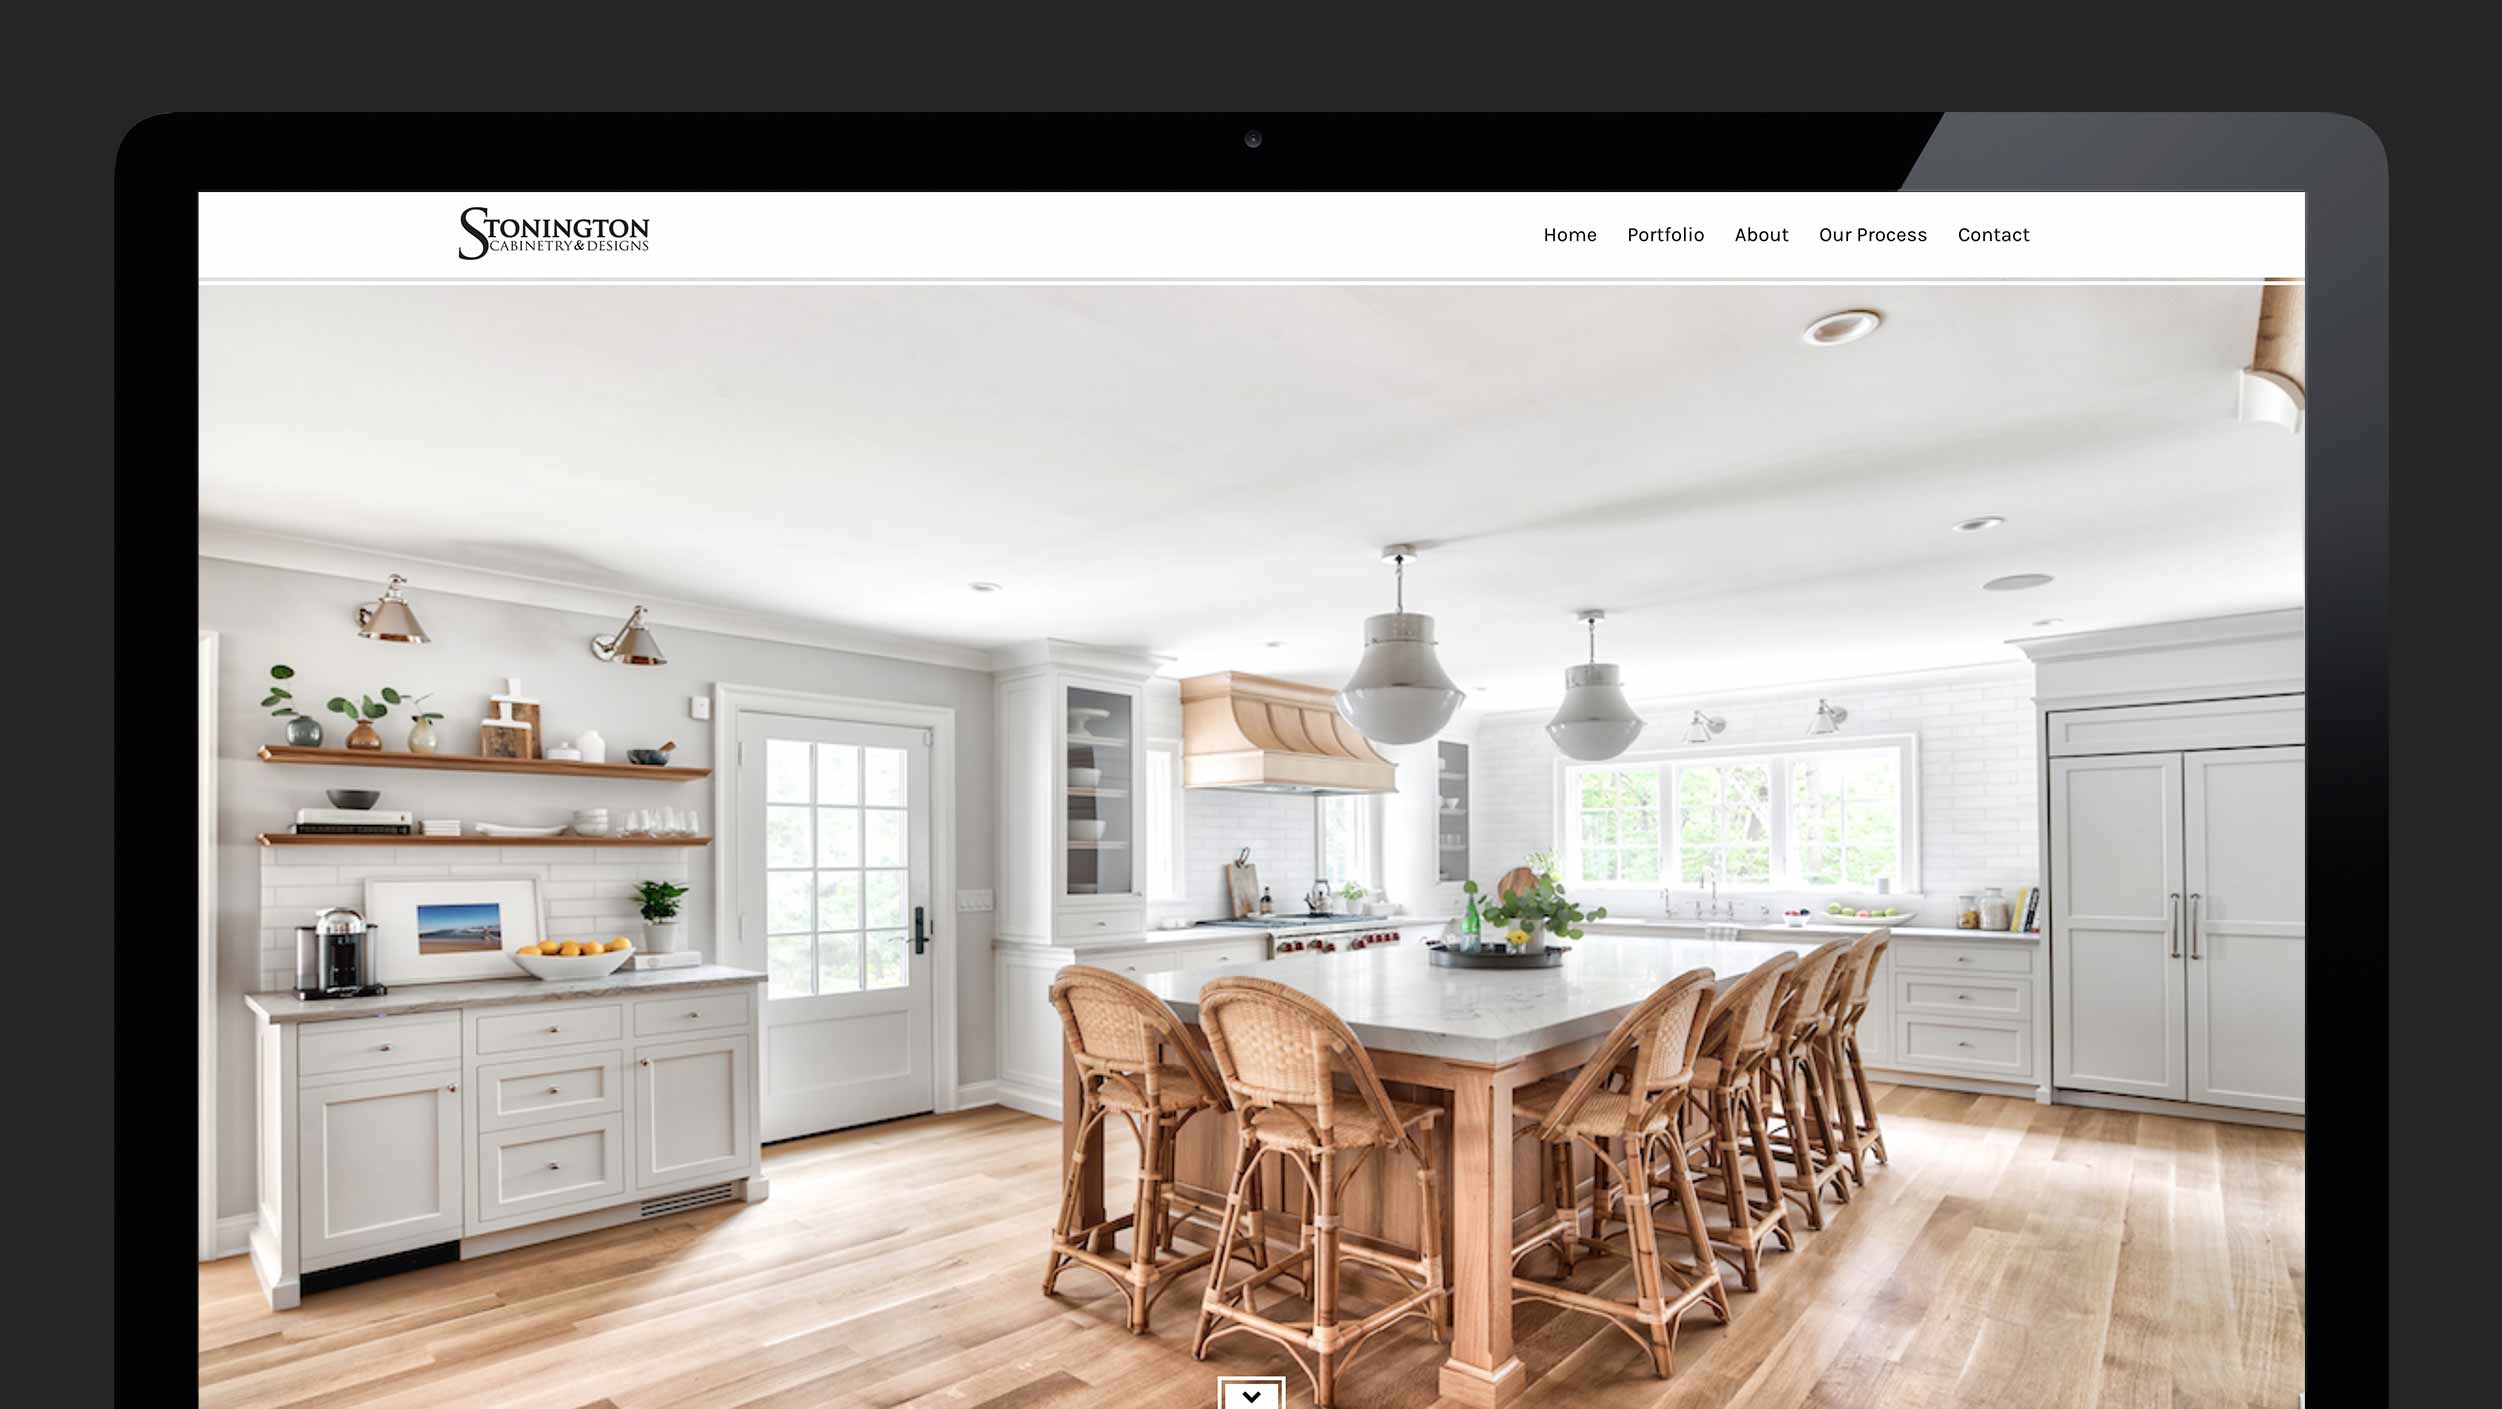 Homepage of WordPress interior design website design for Stonington Cabinetry in New Jersey.